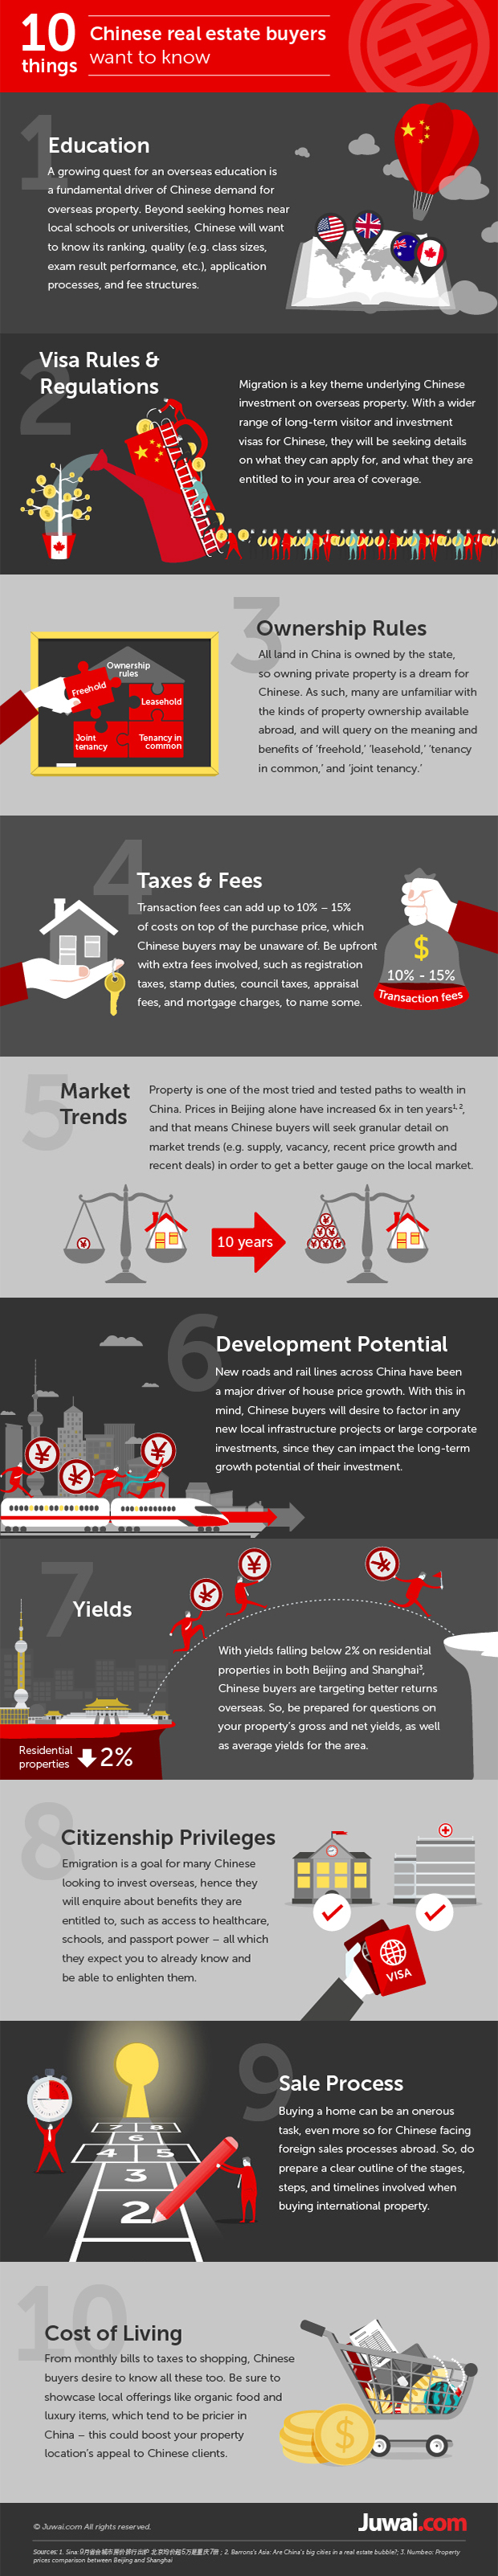 Juwai Infographic 10 things Chinese buyers want to know